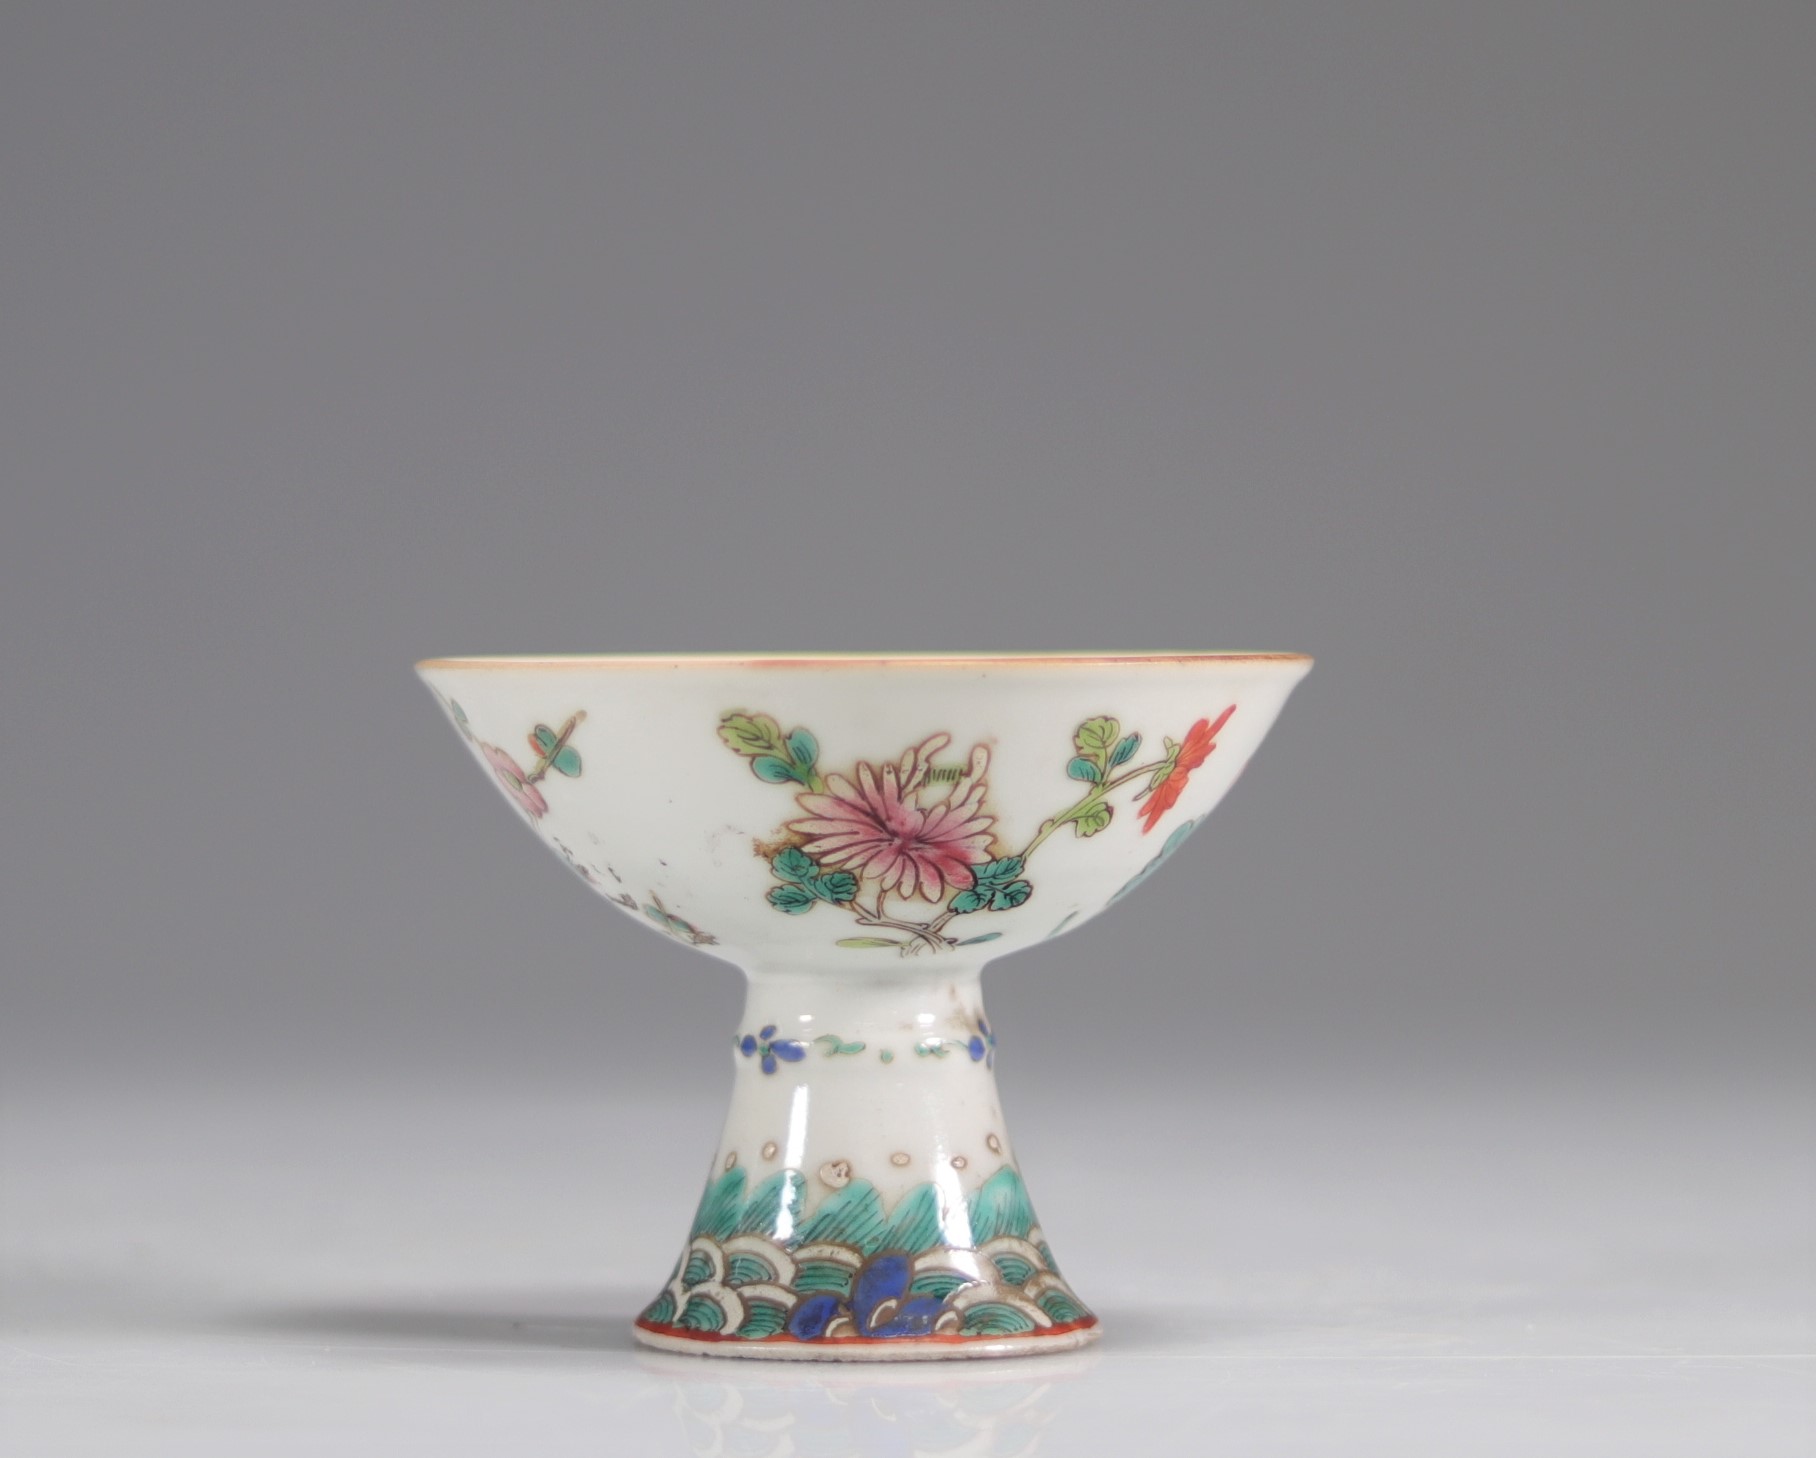 19th century Chinese porcelain bowl - Image 4 of 4